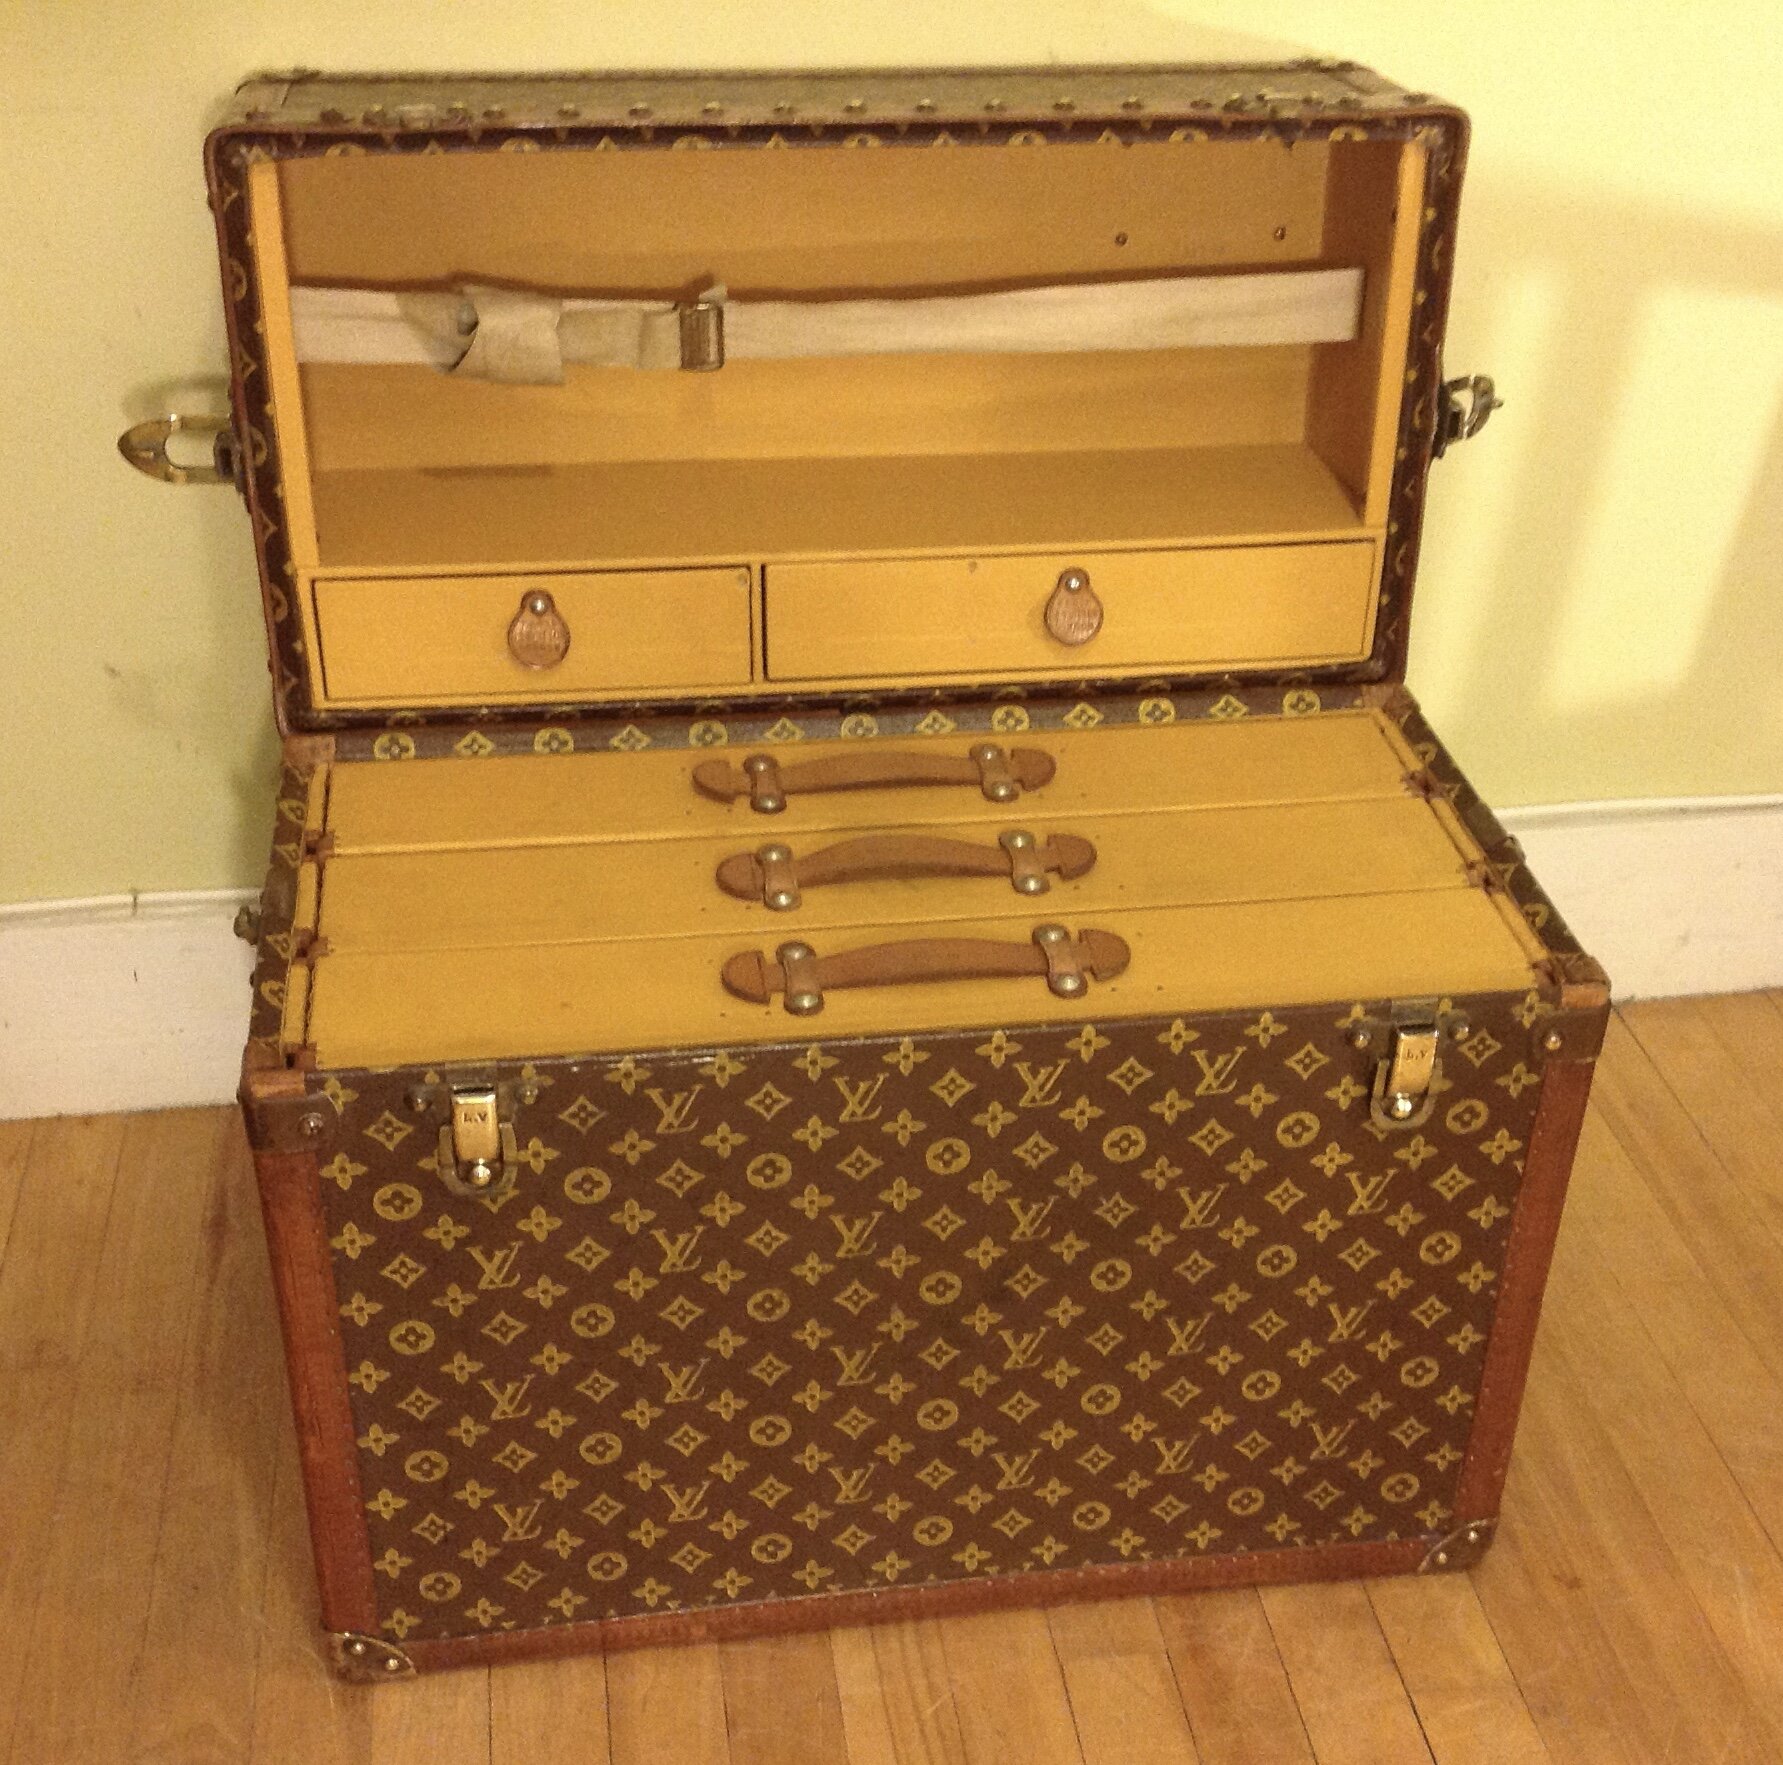 How to Appraise your early Louis Vuitton Trunk – Anubis Appraisal